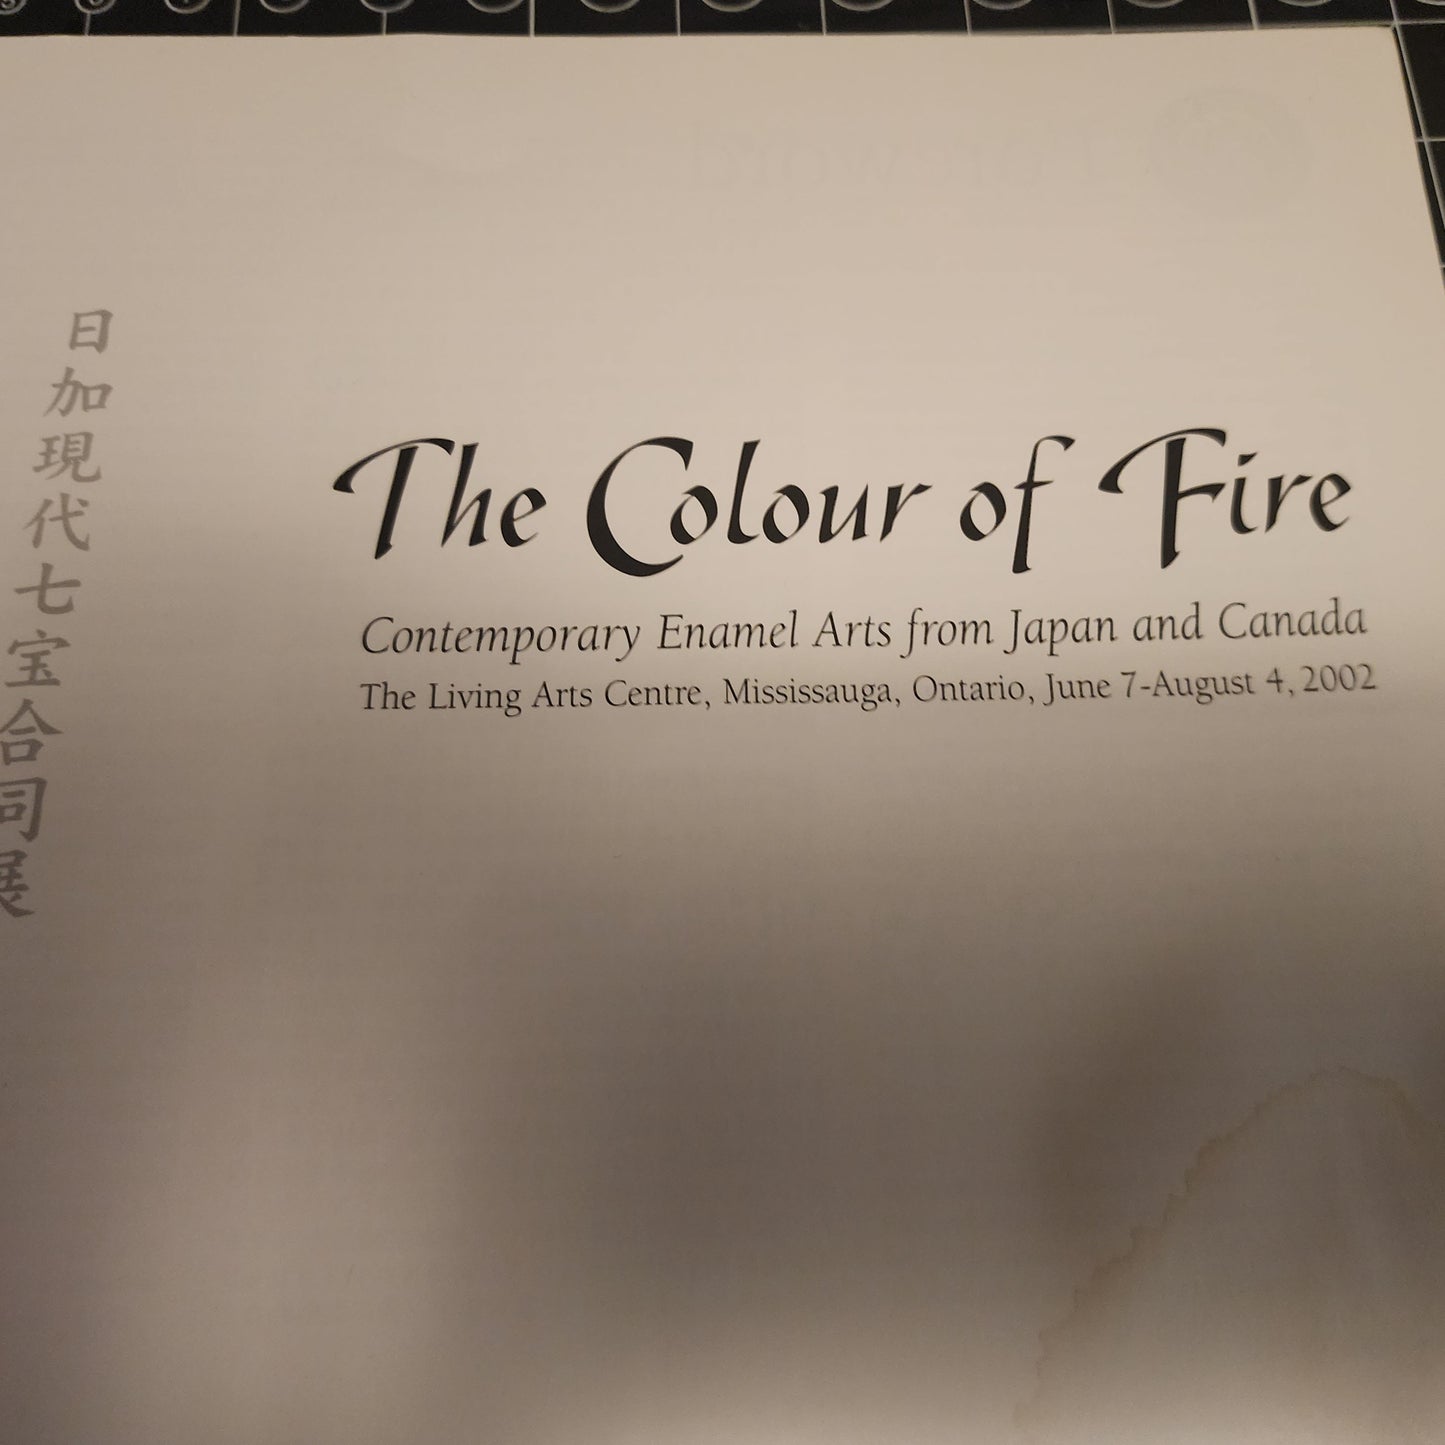 The Emporium Book Shelf  - The Colour of Fire: Contemporary Enamel Arts from Japan and Canada by David Hustler